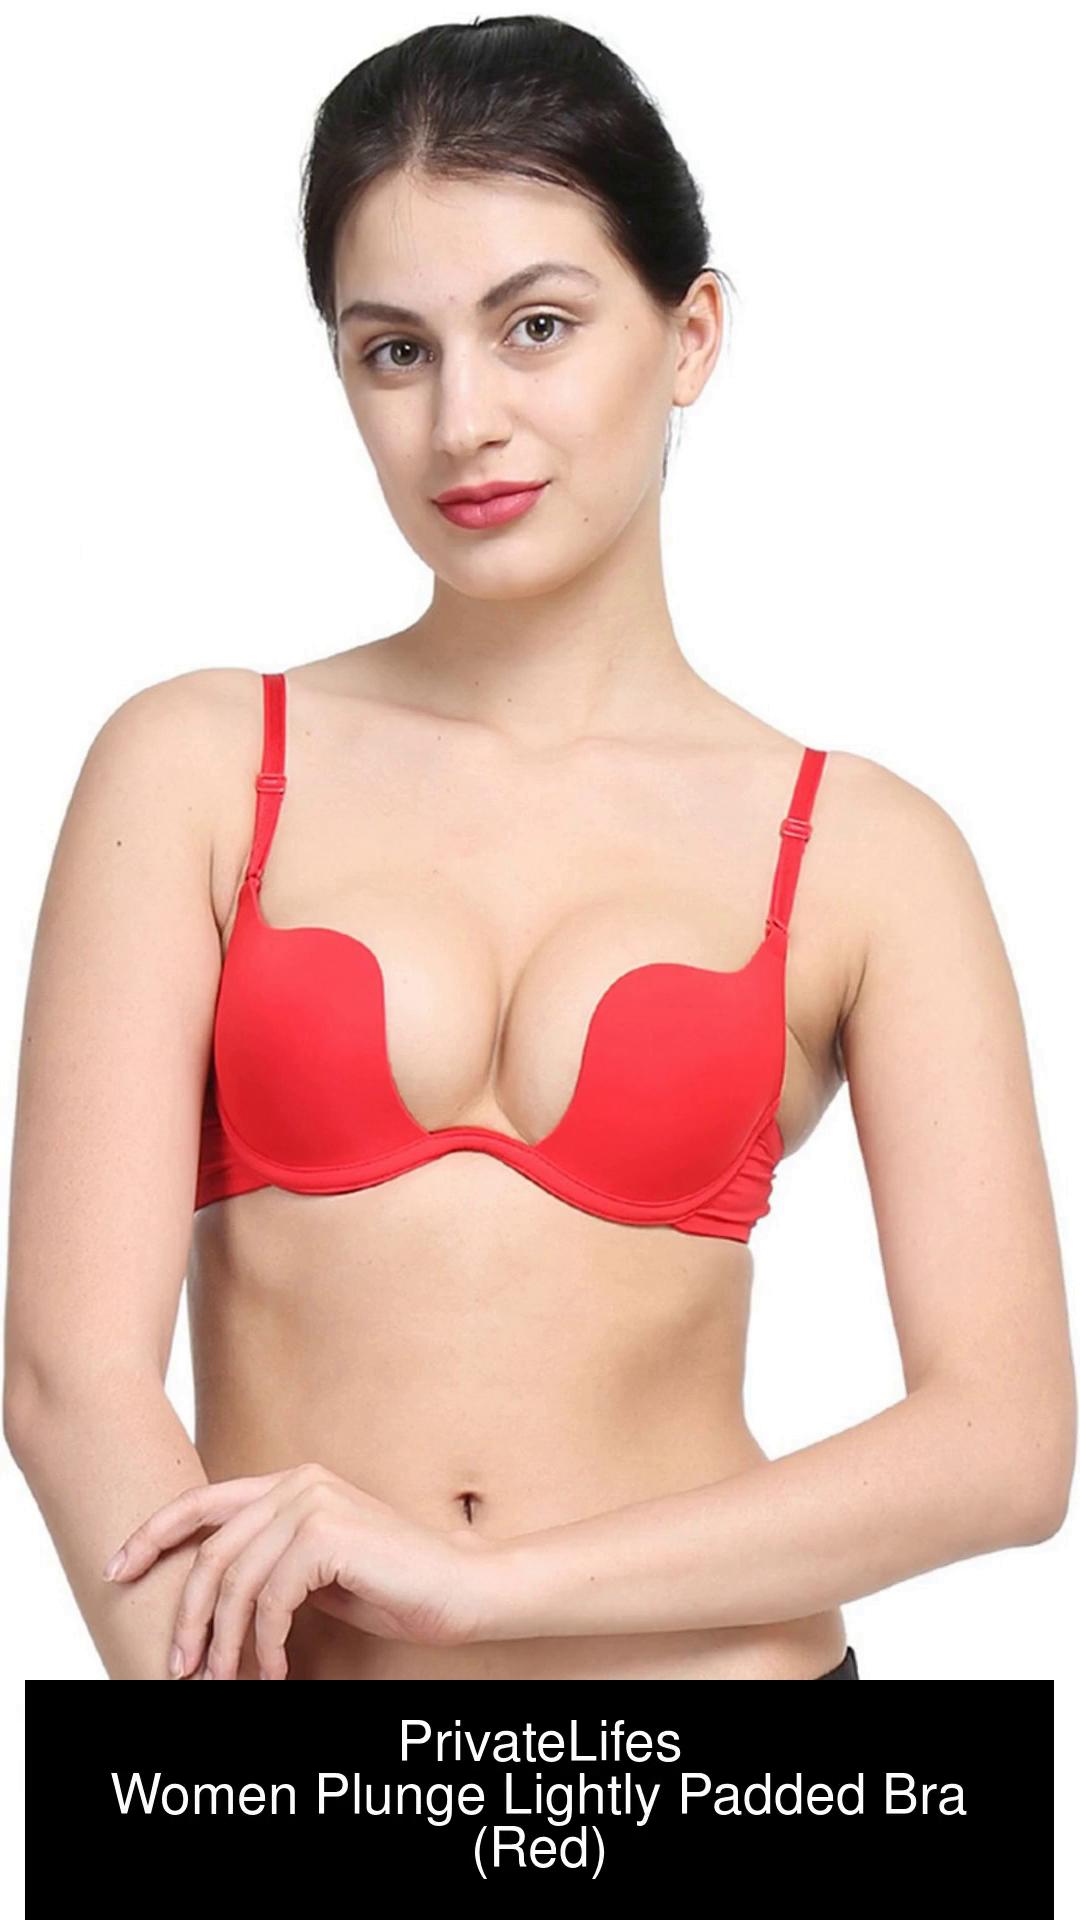 PrivateLifes Beautiful Fantastic Women Plunge Lightly Padded Bra - Buy Red  PrivateLifes Beautiful Fantastic Women Plunge Lightly Padded Bra Online at  Best Prices in India